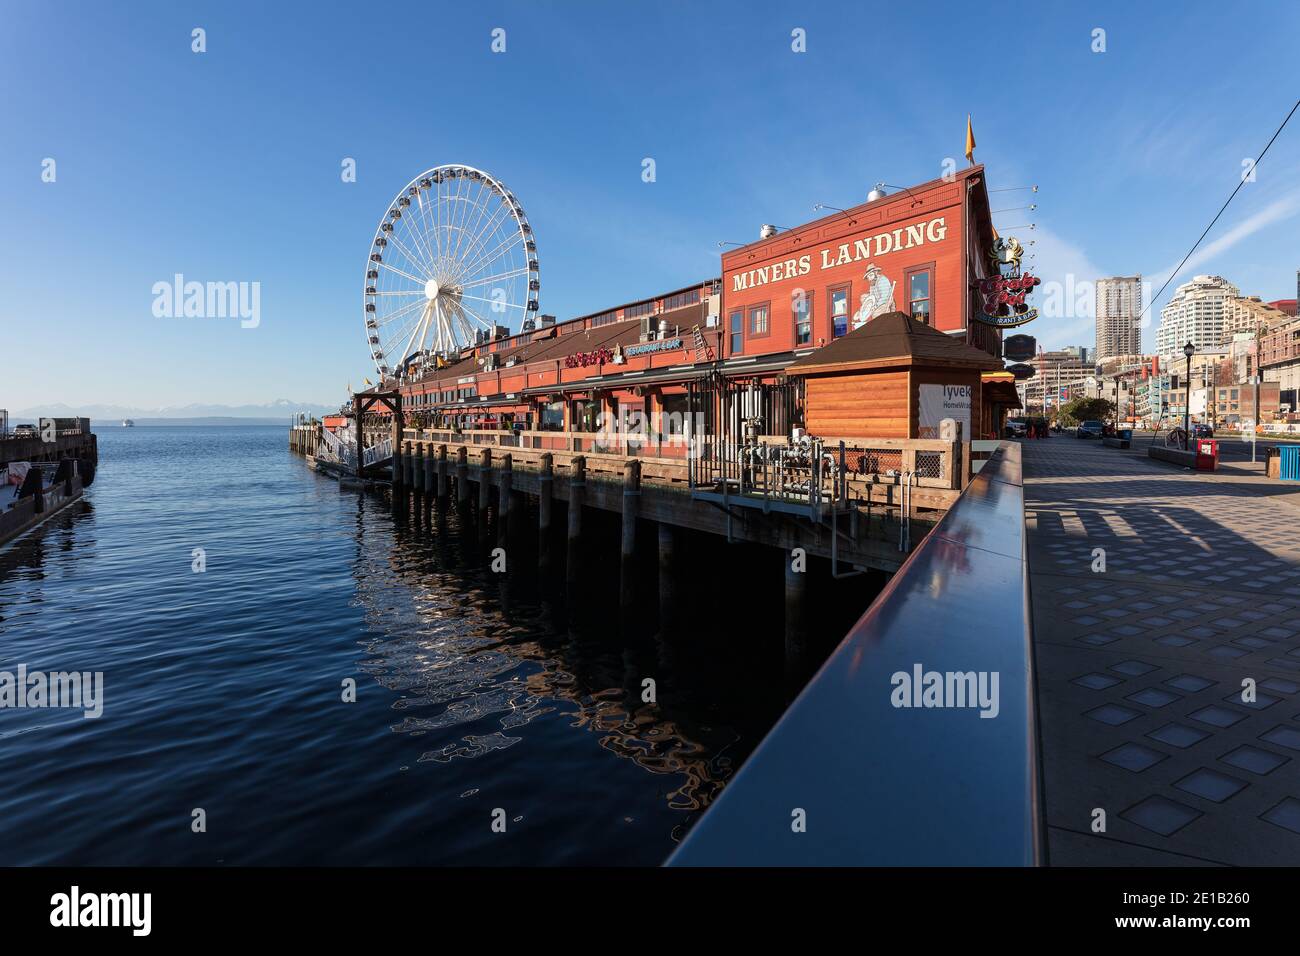 Miner's Landing at Pier 57 and the Great Wheel in Seattle, Washington Stock Photo